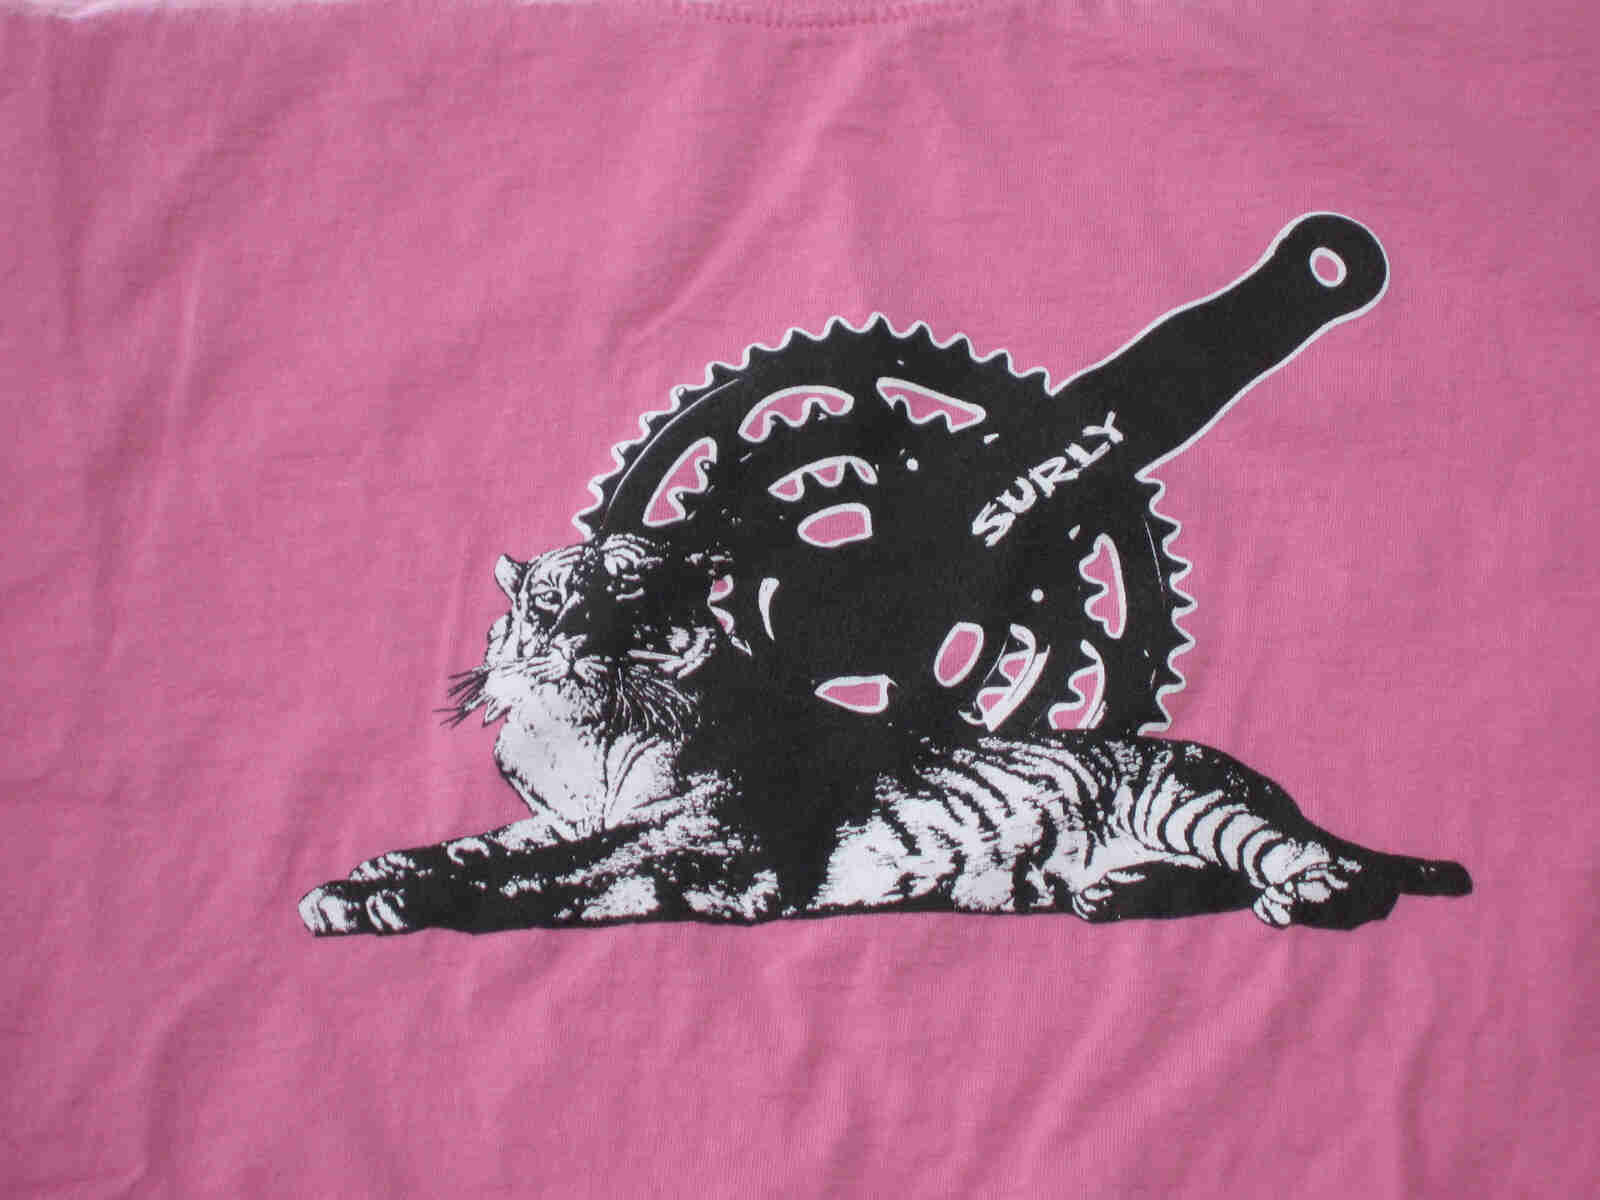 Front, chest area view of a pink Surly Bikes t-shirt with a graphic of a bike crank and a tiger